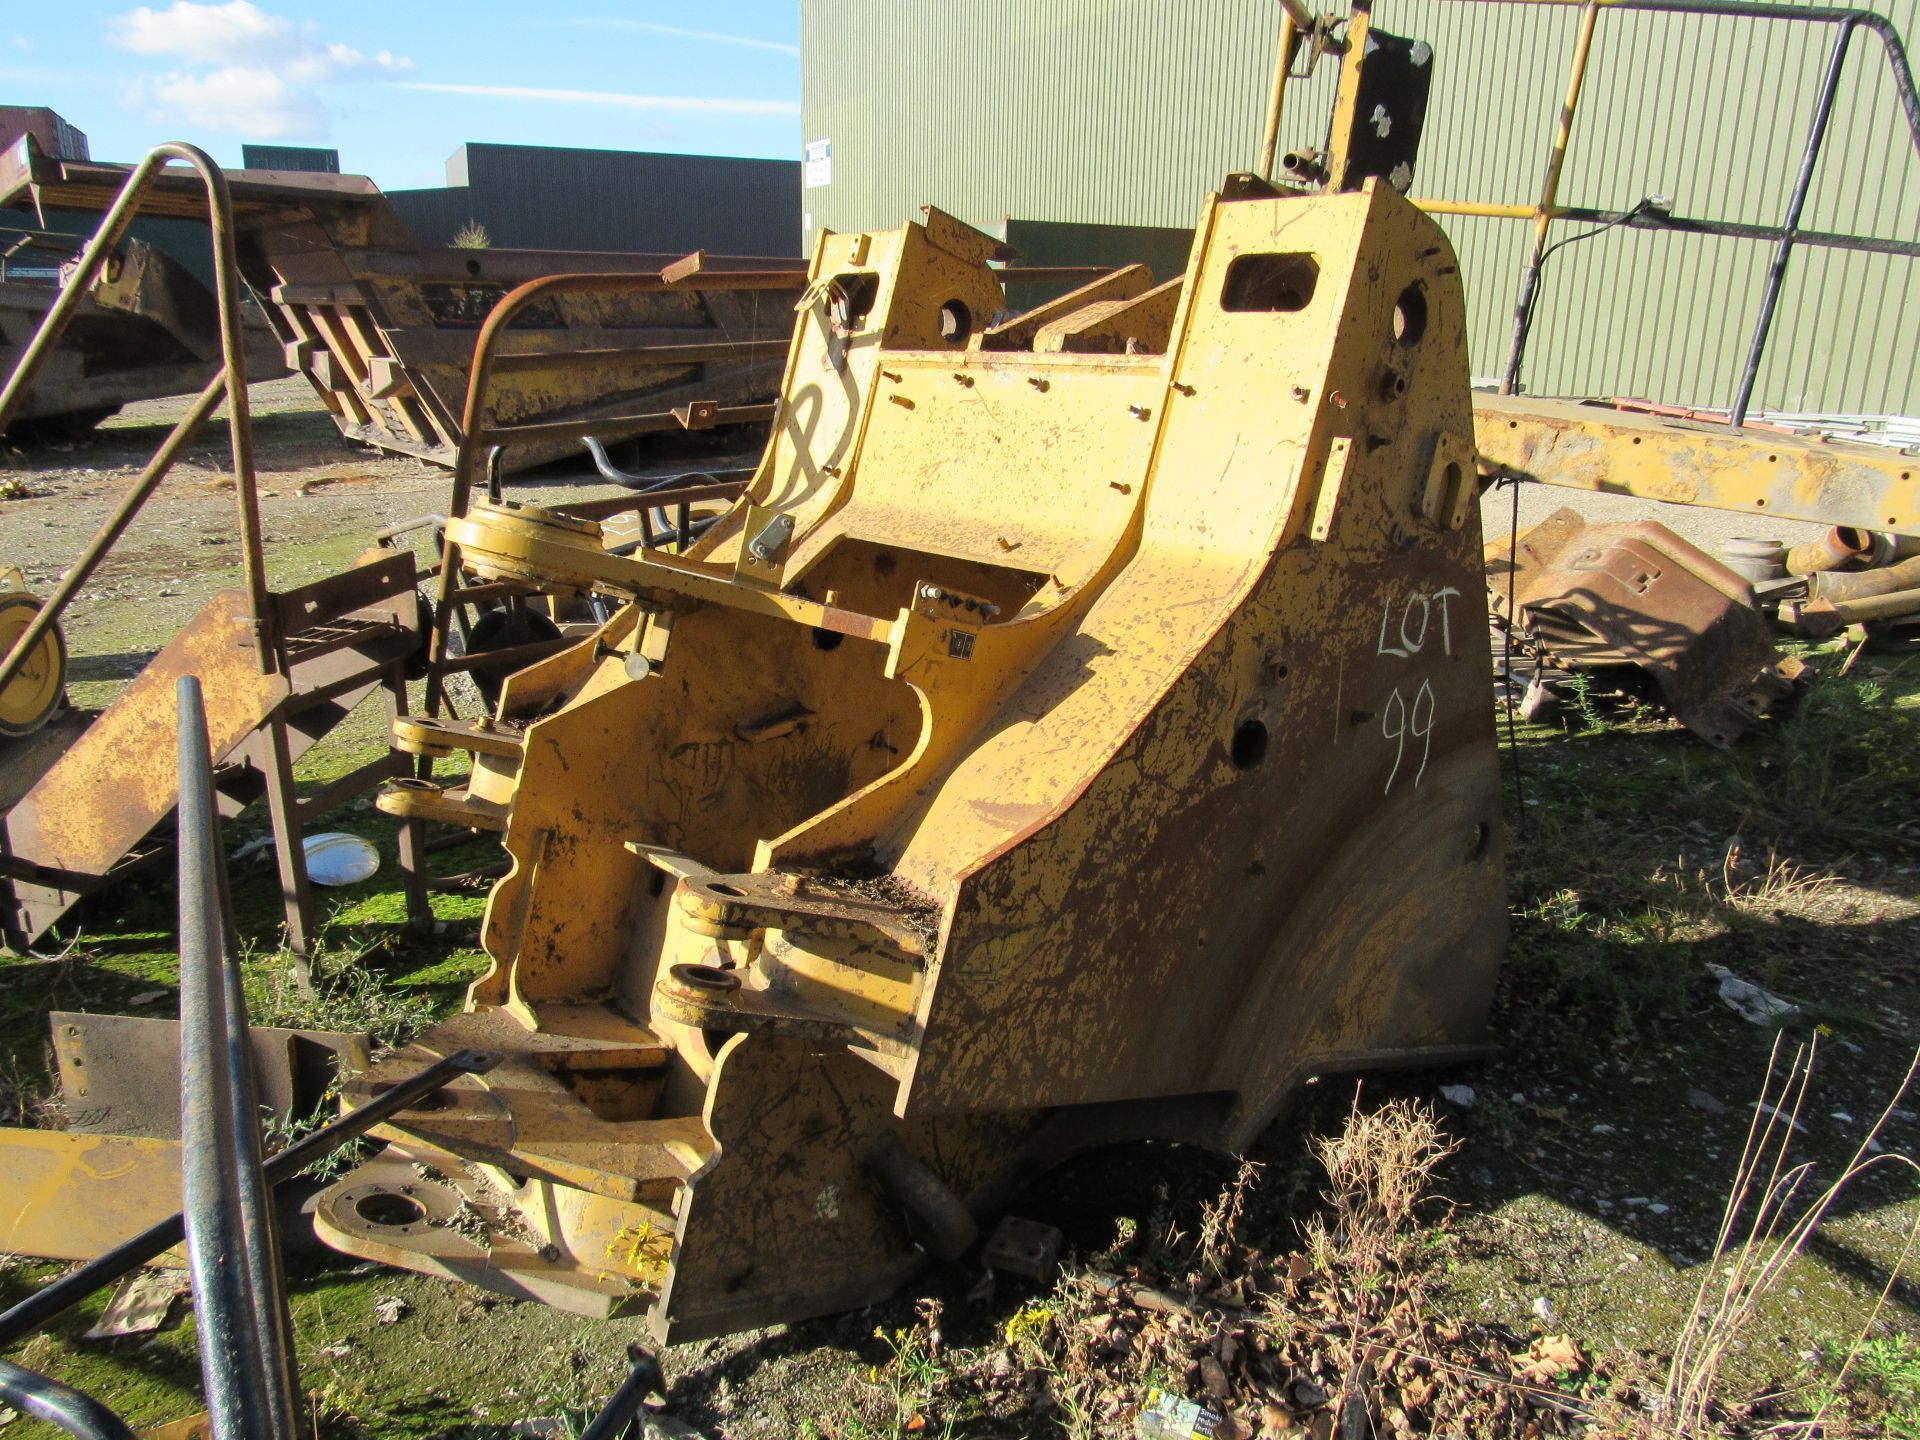 Caterpillar 972H front chassis (was taken from a machine to be scrapped)